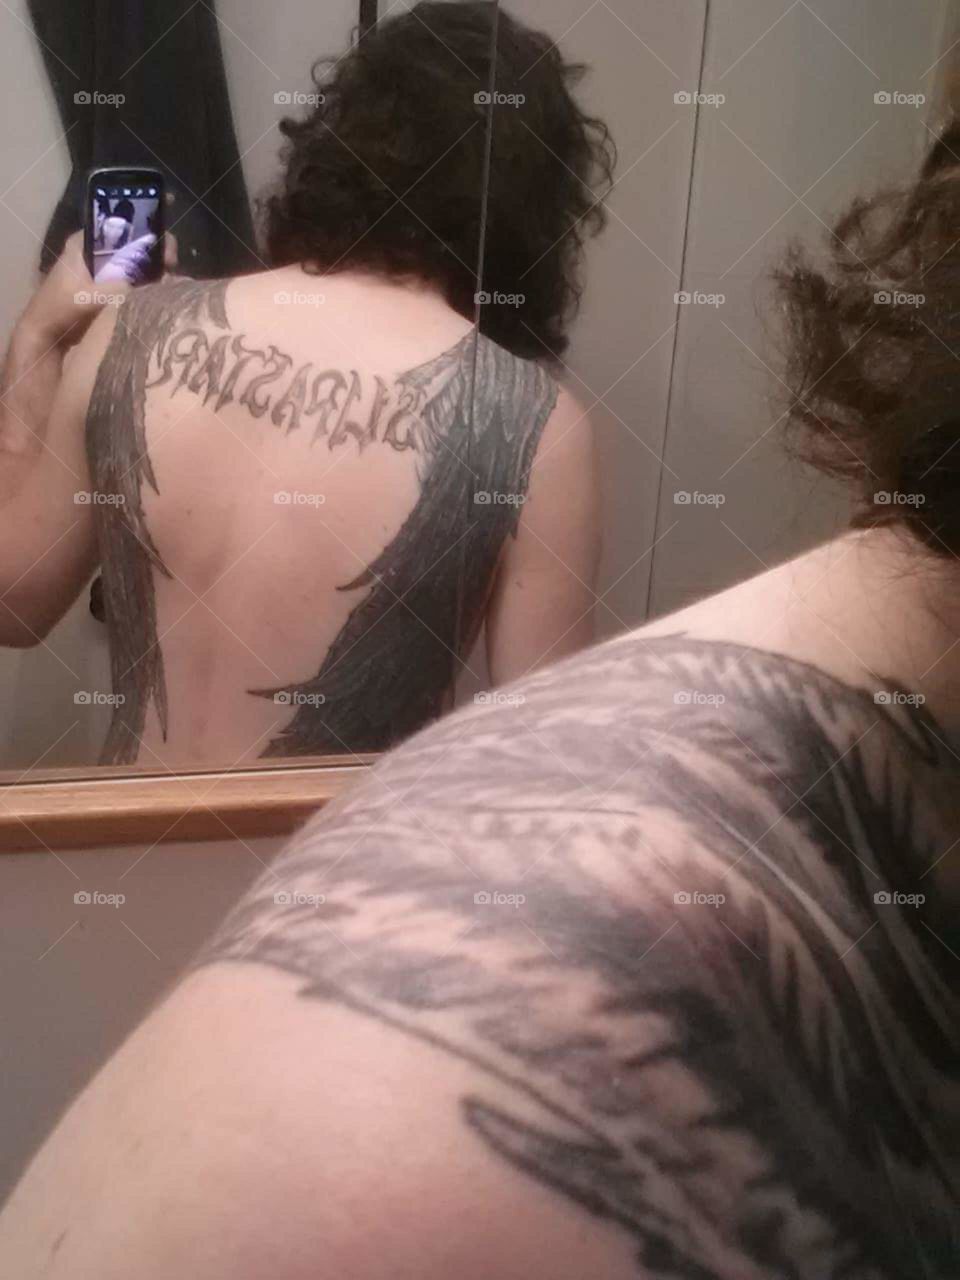 nice tattoo, nice back, picture in picture